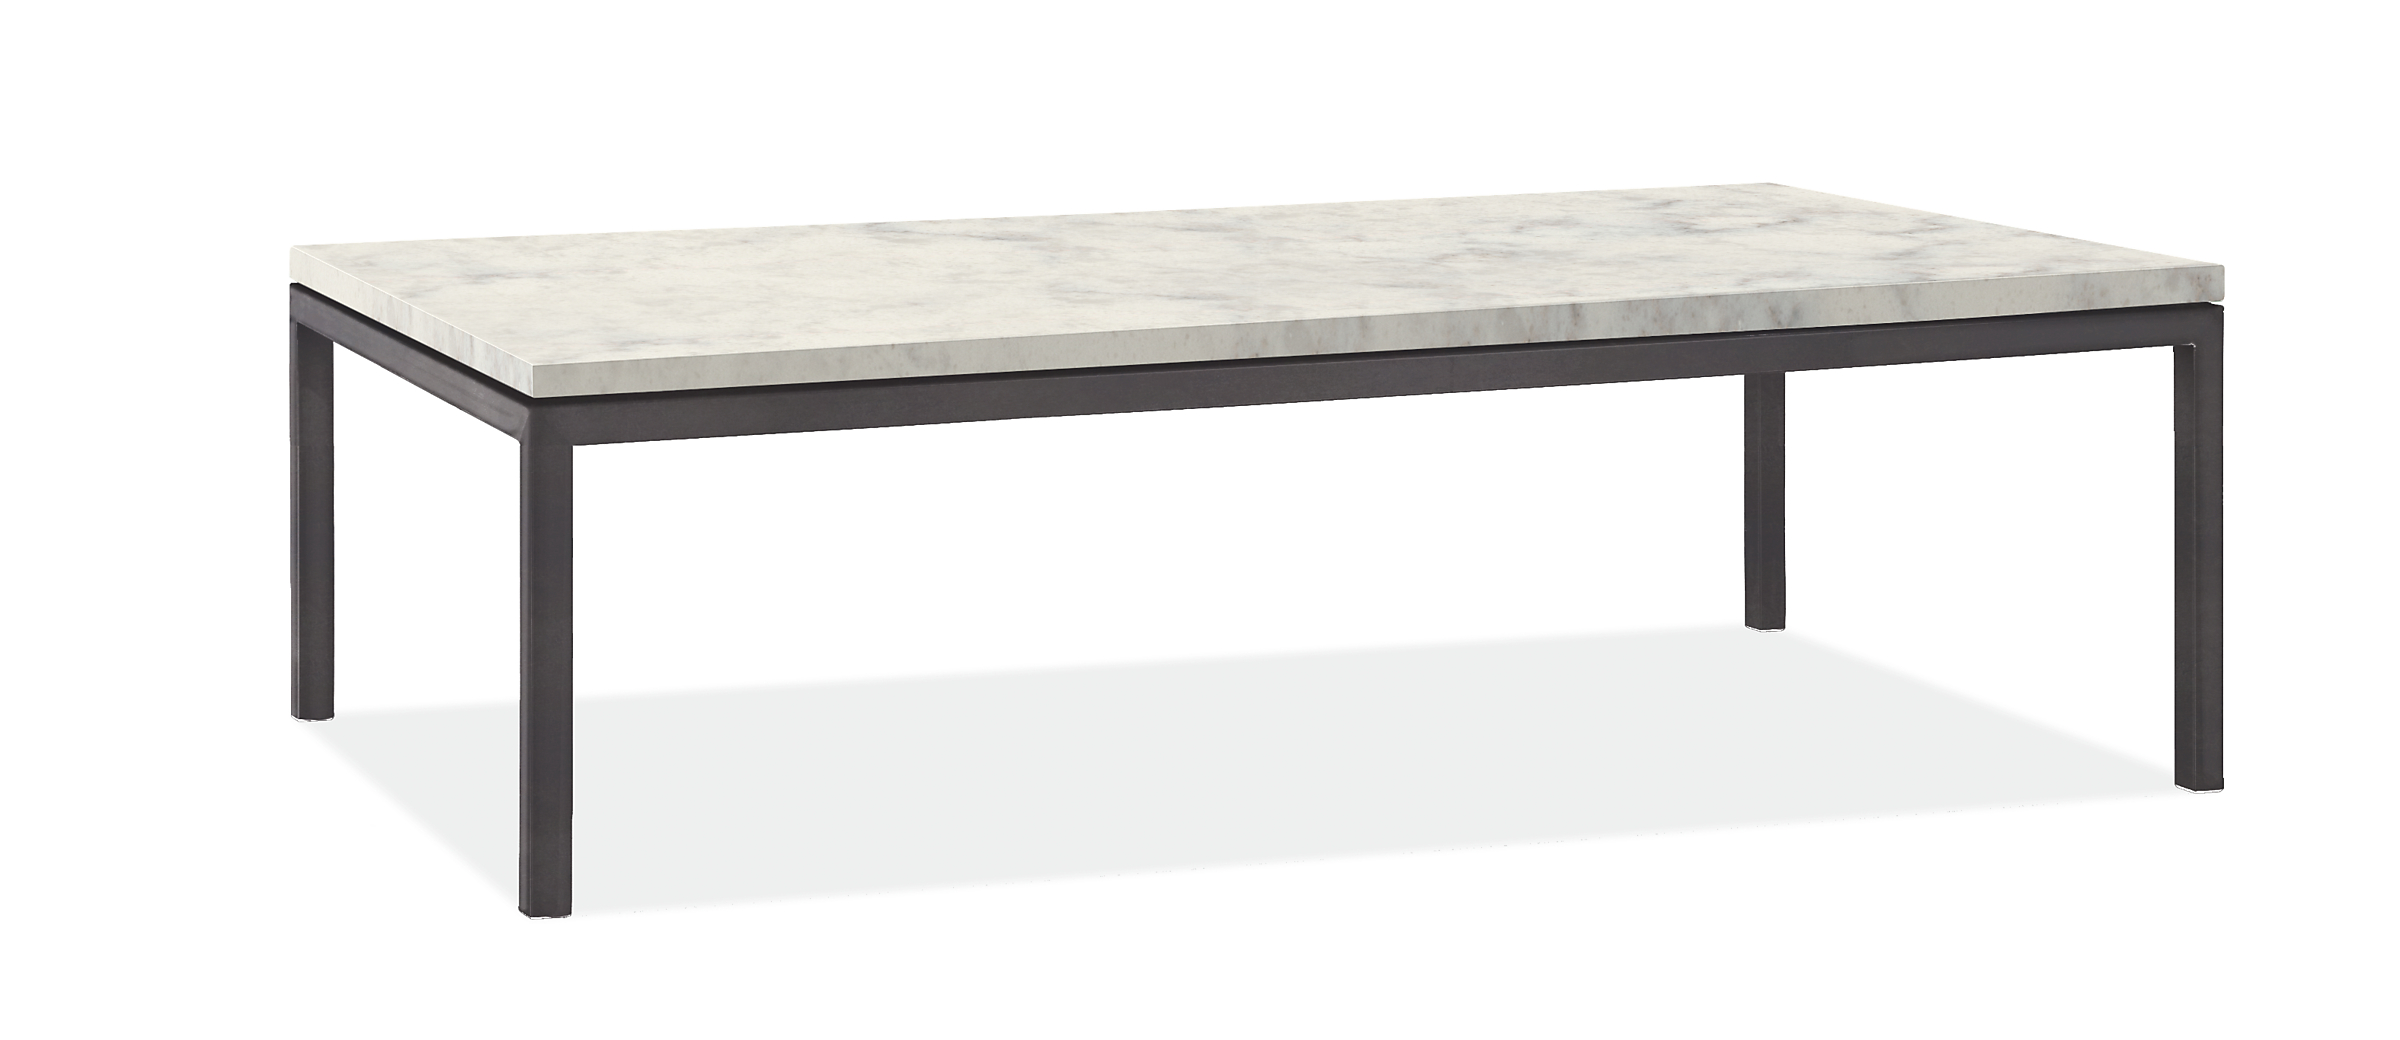 Parsons 60w 24d 16h Coffee Table with 1" Leg